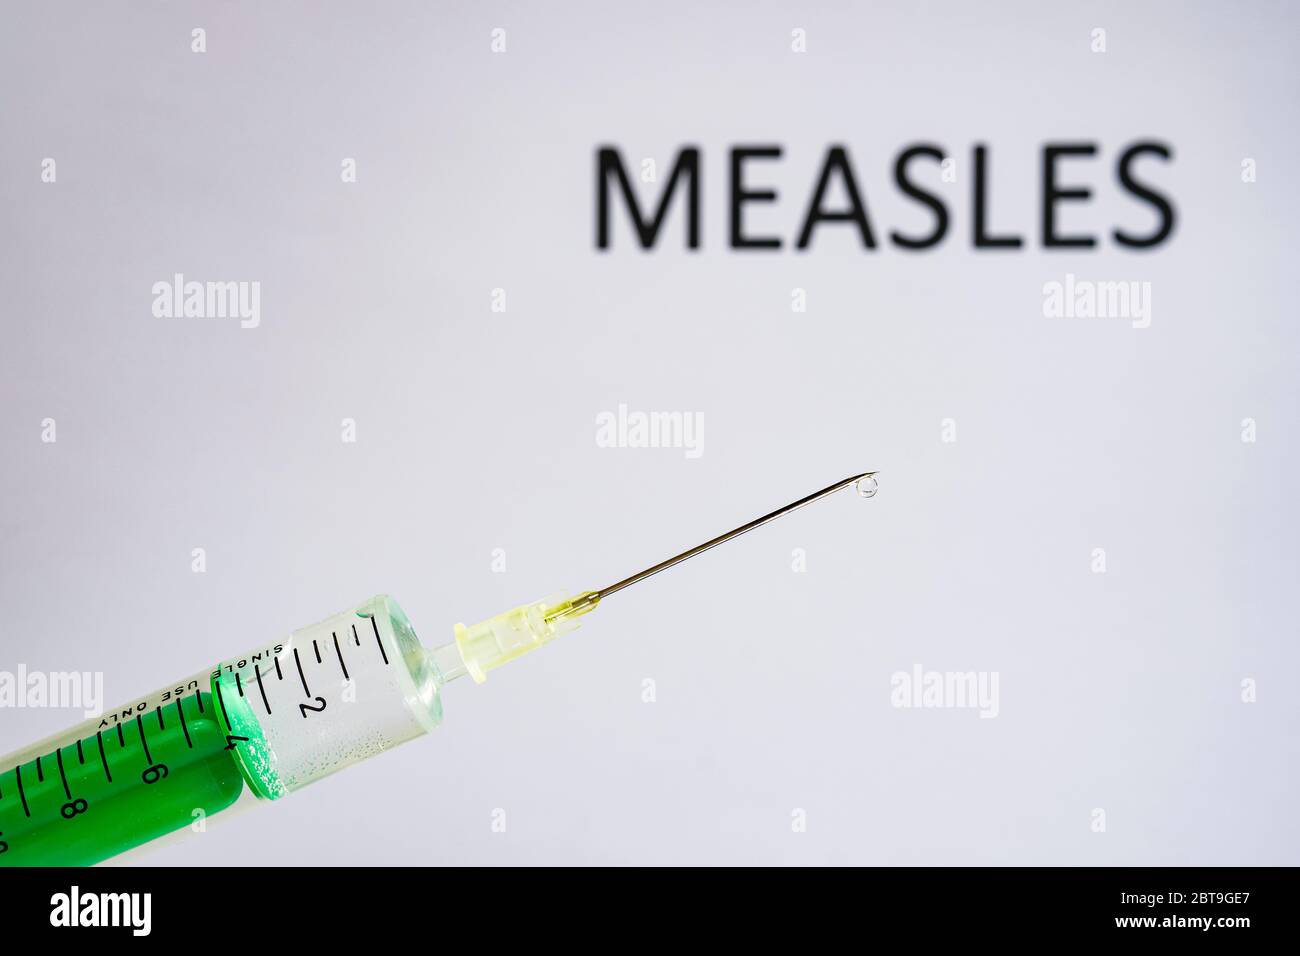 This photo illustration shows a disposable syringe with hypodermic needle, MEASLES written on a white board behind Stock Photo